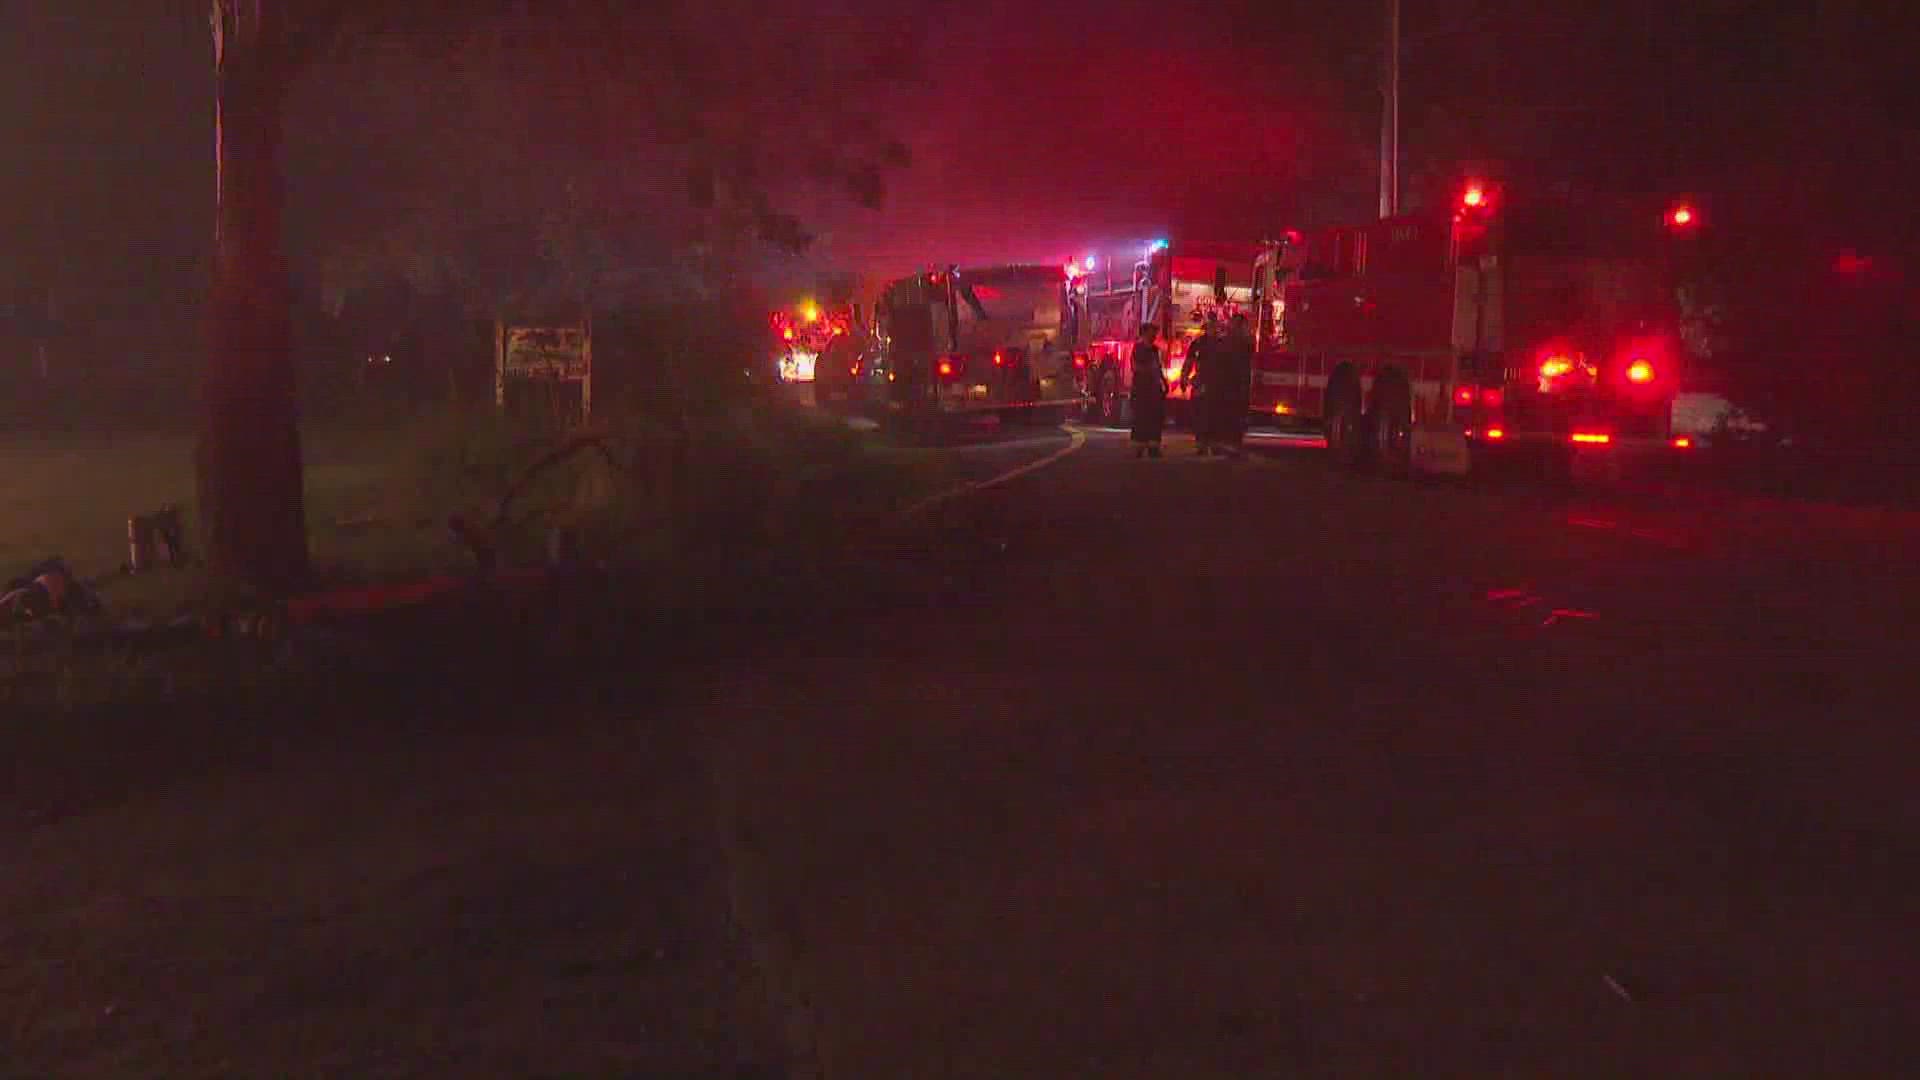 Several crews are responding to a fire at Flaggy Meadow Farm in Gorham.